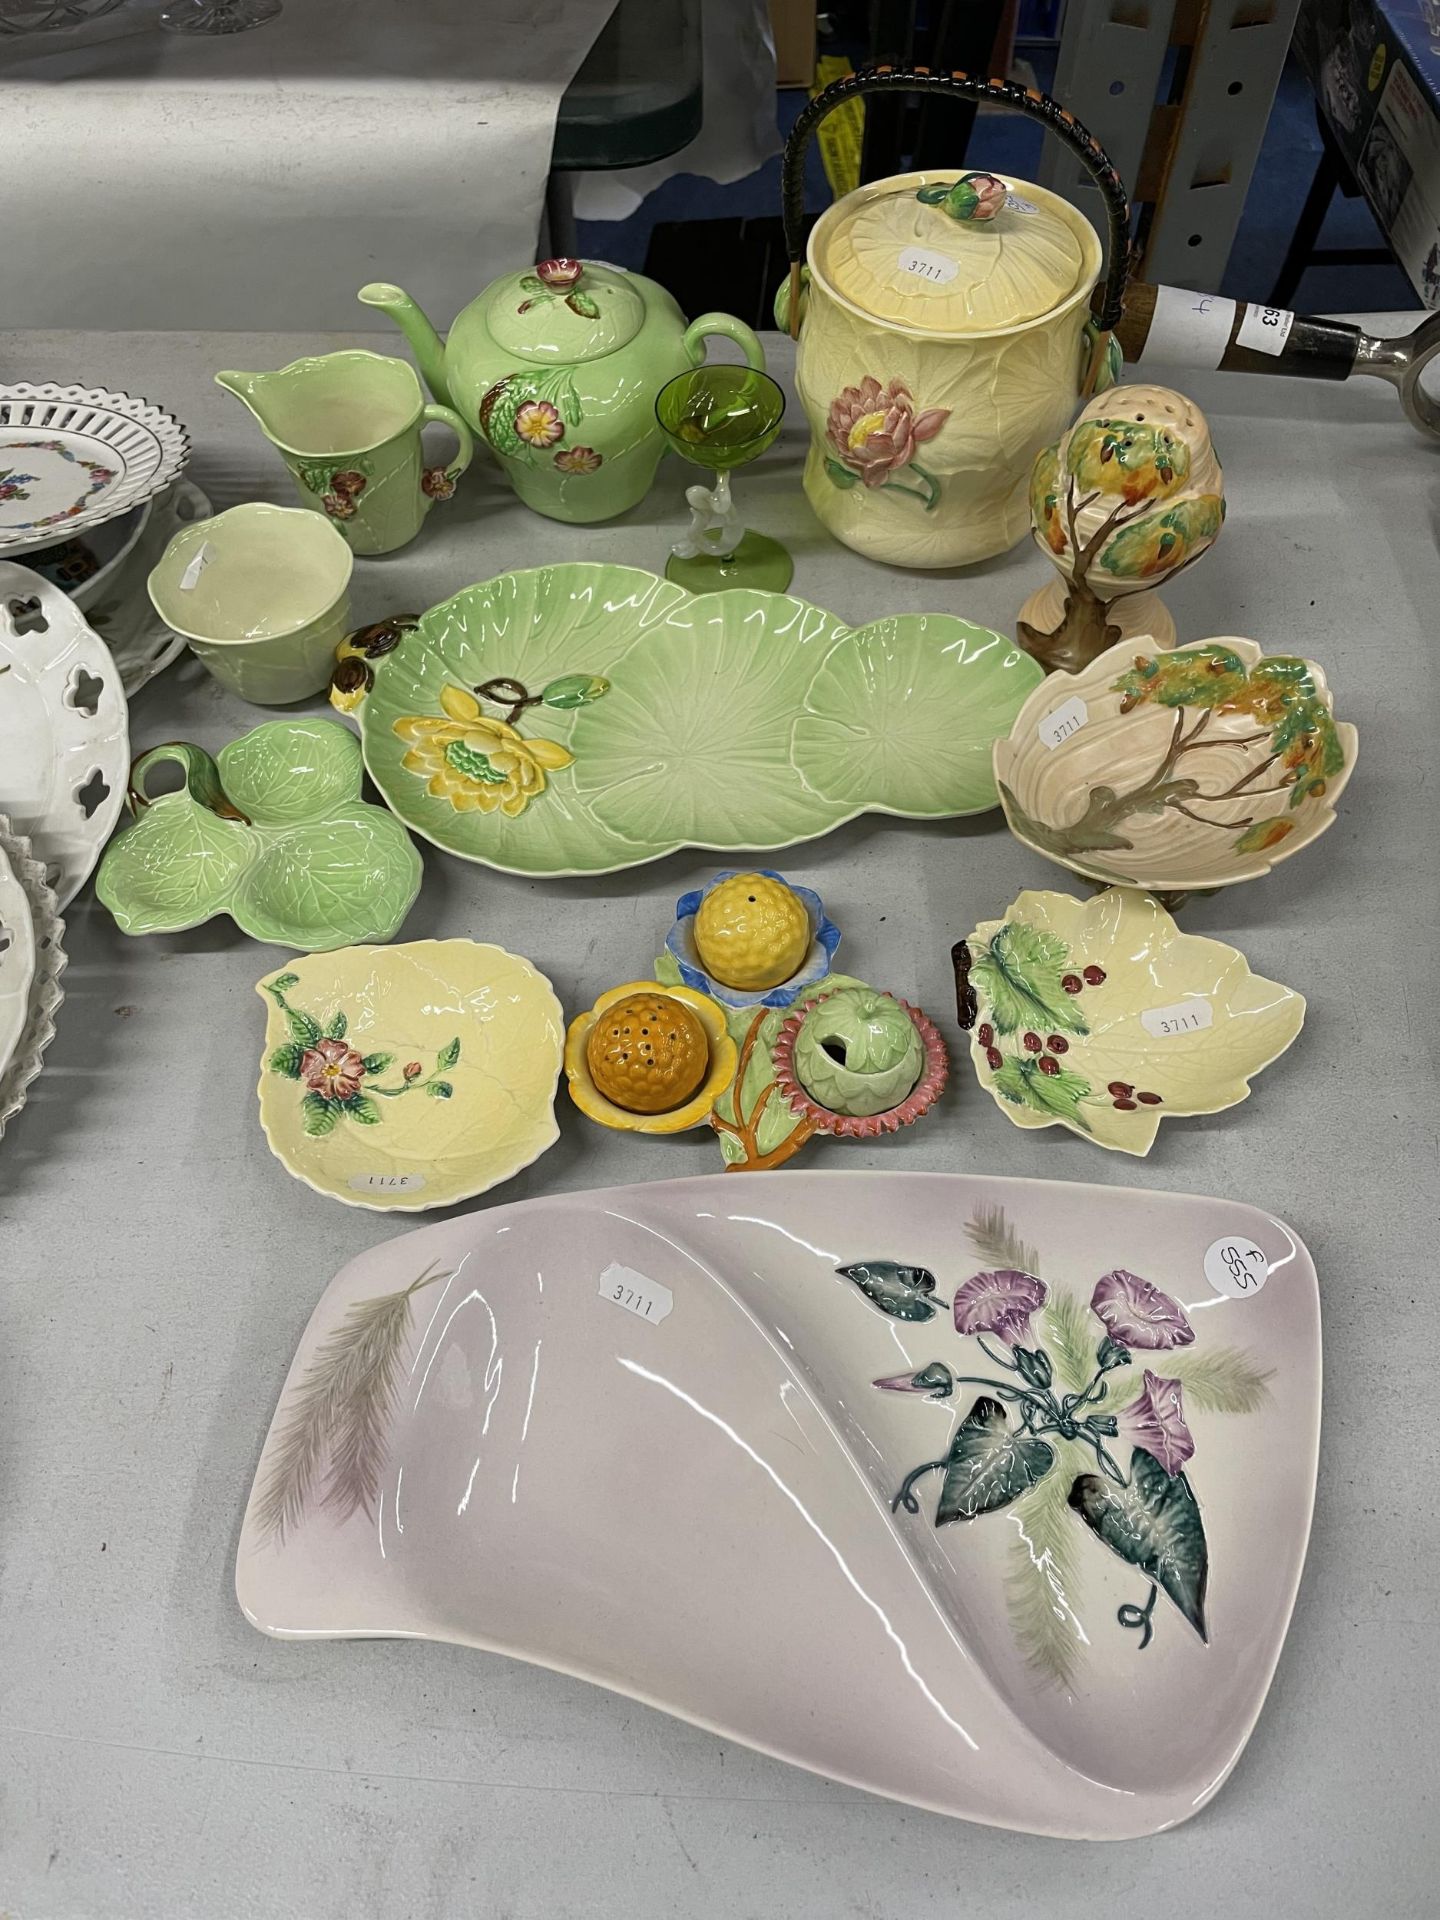 A COLLECTION OF CARLTONWARE TO INCLUDE LEAF SHAPED PLATES, BISCUIT BARREL, CRUET SET, BOWLS ETC